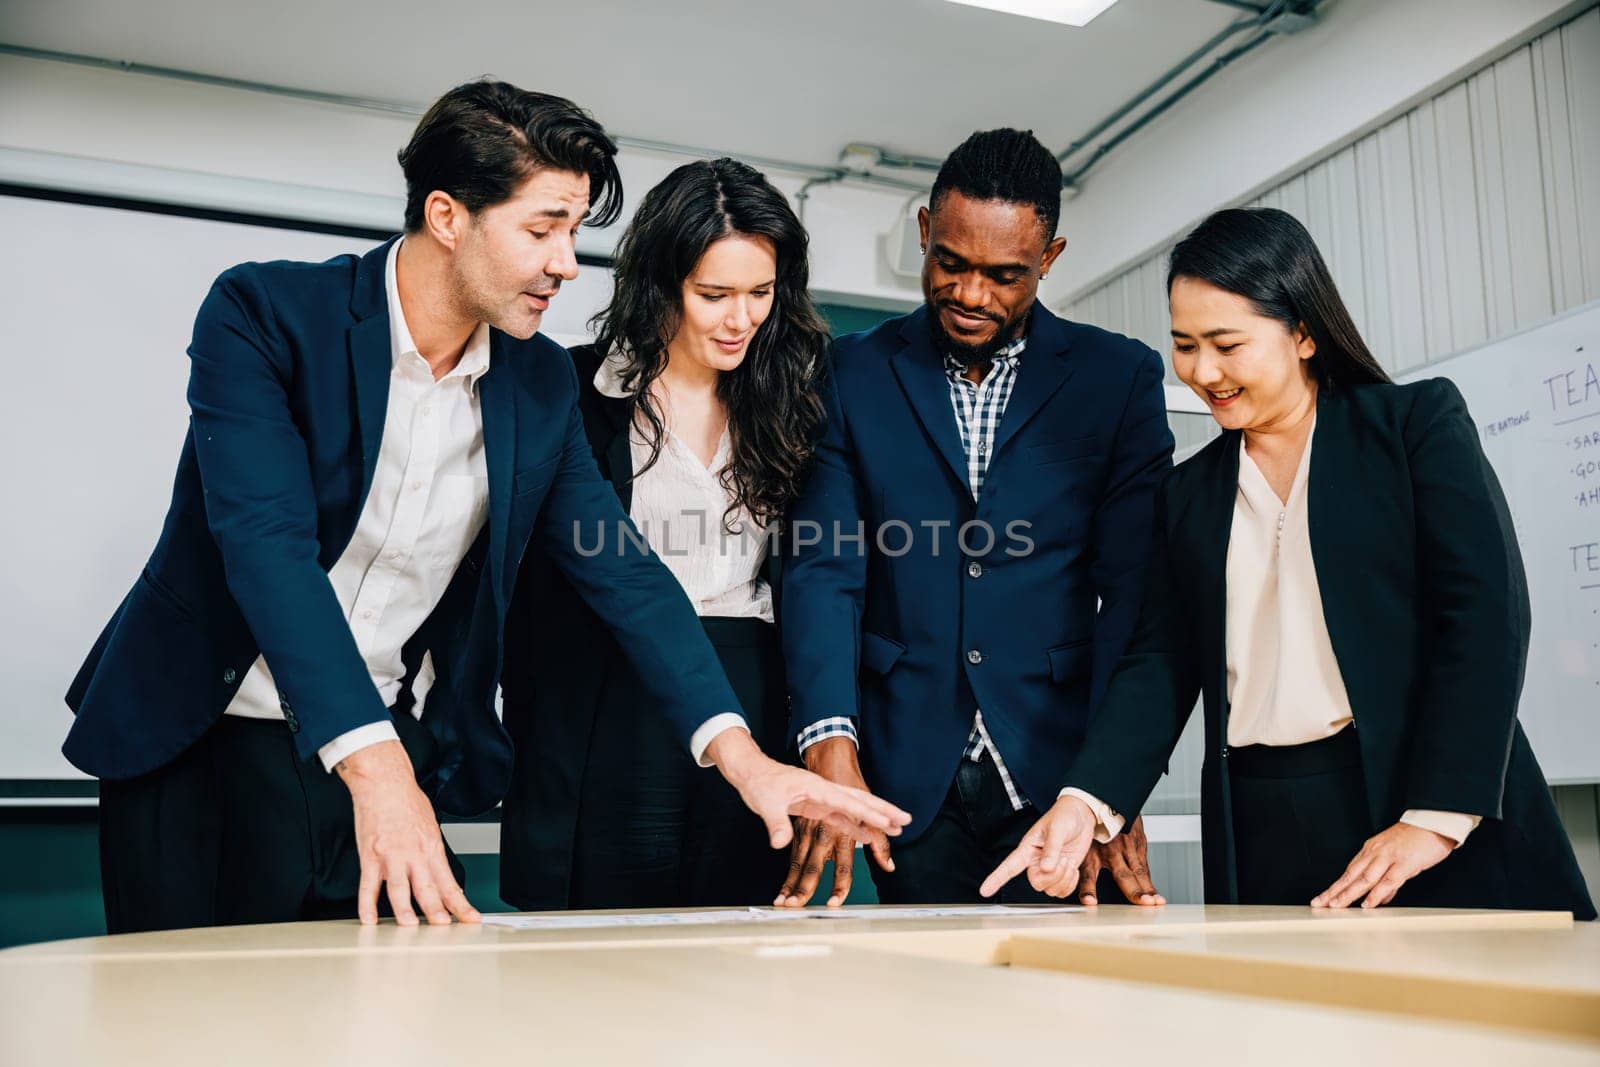 A group of professionals stands in a conference room, engaged in a successful meeting. Teamwork, planning, and smiles underscore their commitment to business success.